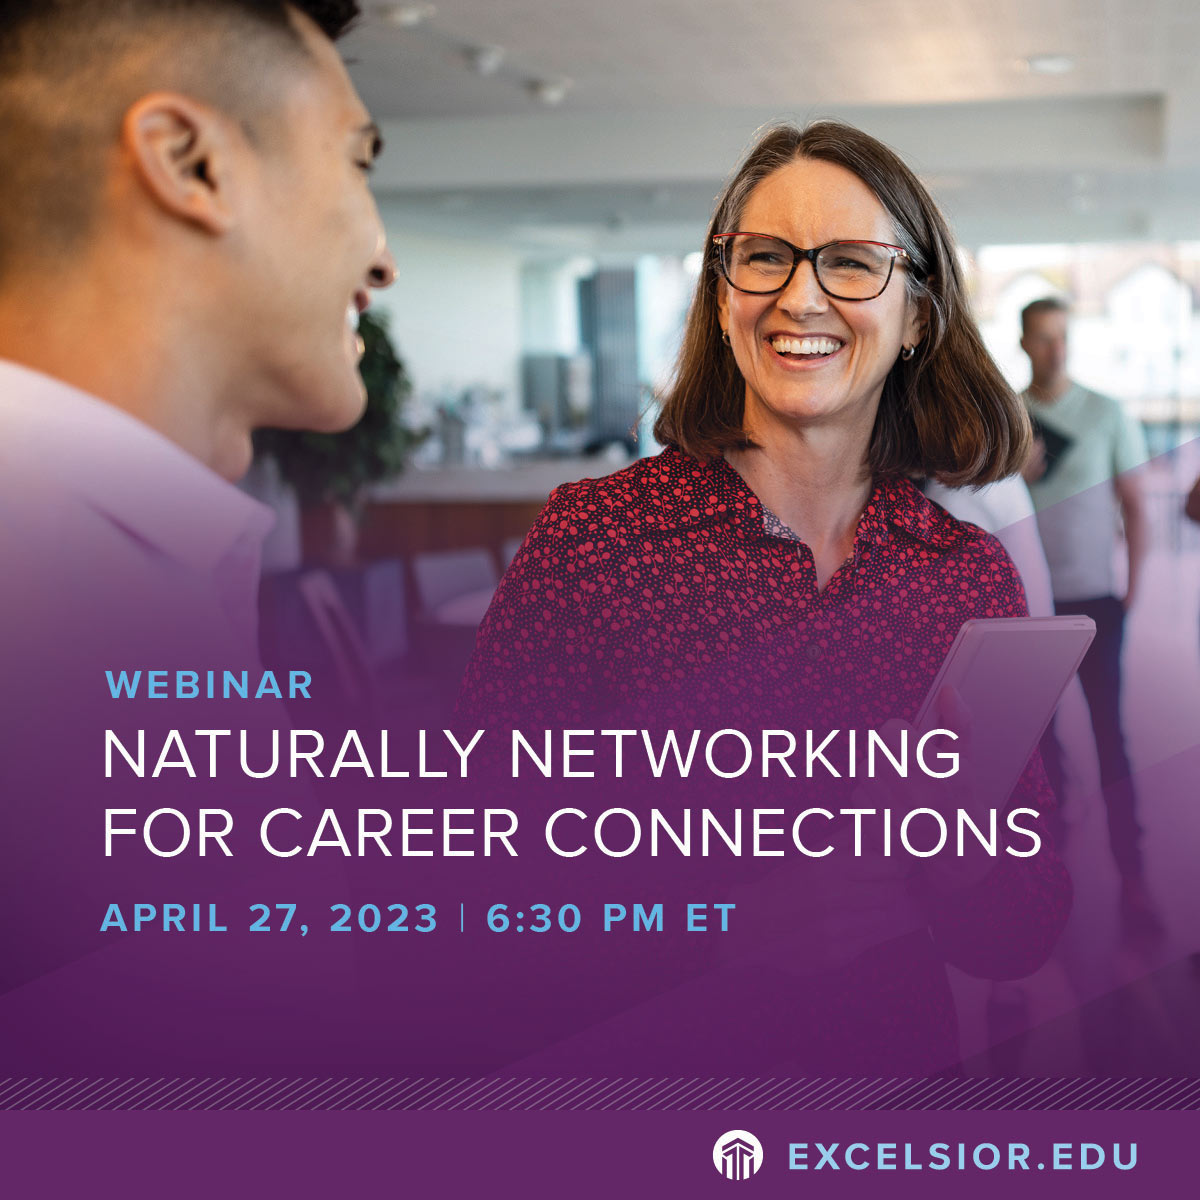 Alumni Webinar: Naturally Networking For Career Connections